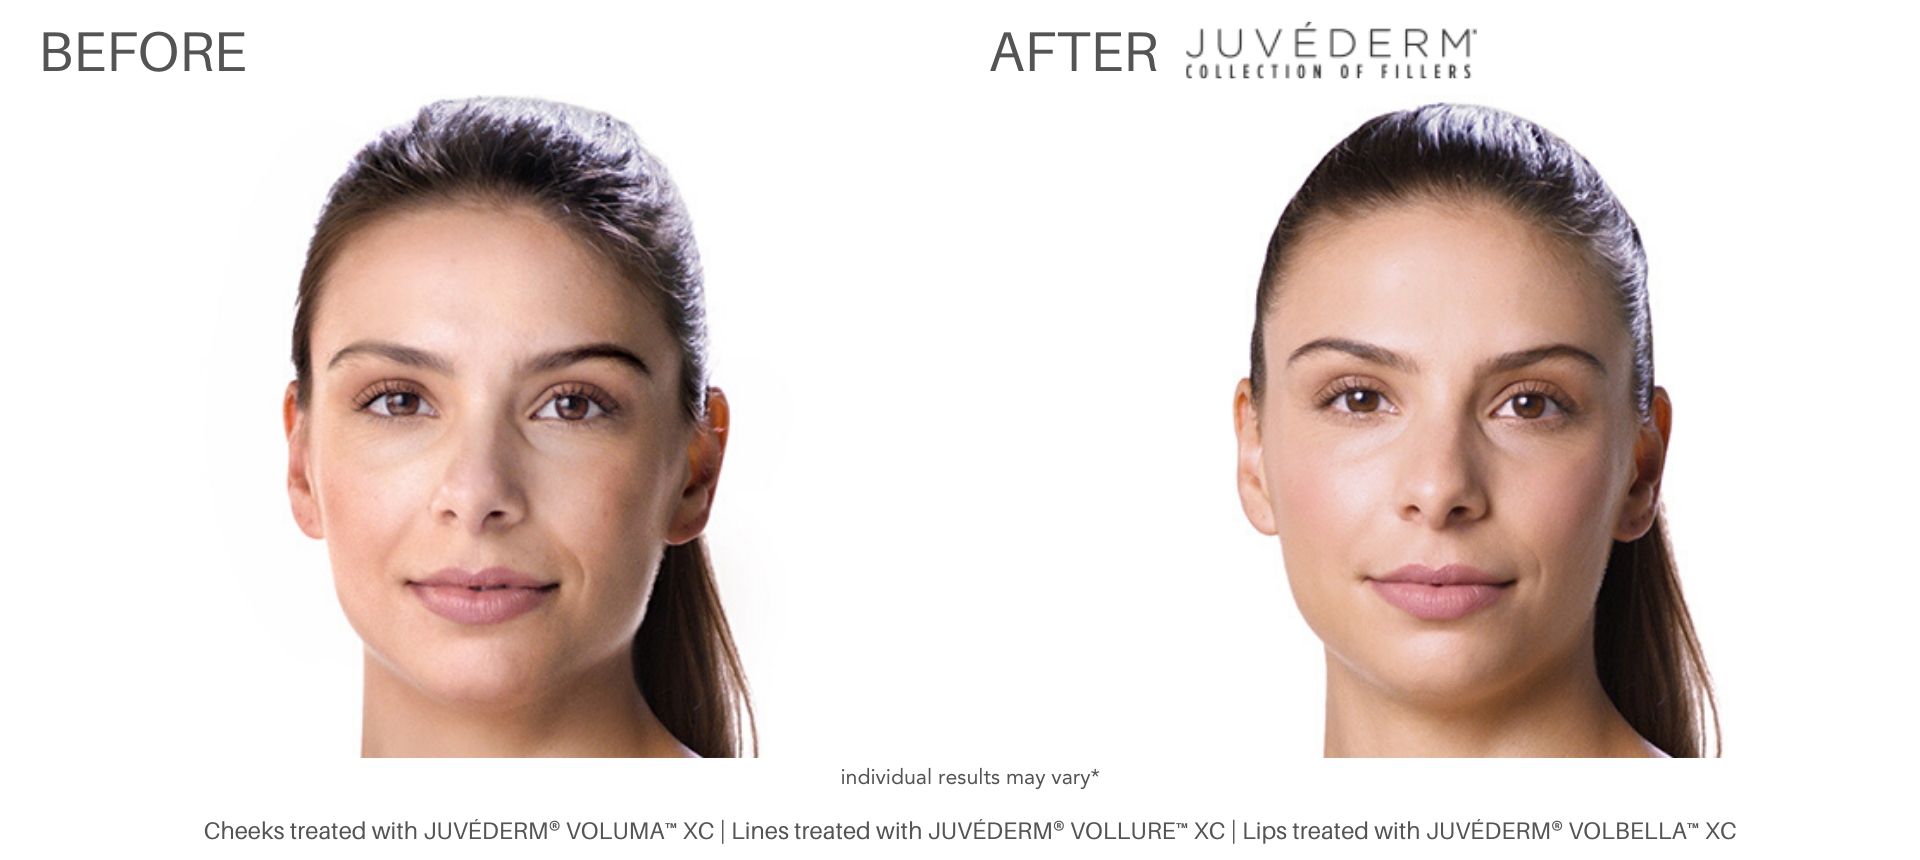 Woman's Juvéderm facial fillers before and after results at Laser + Skin Institute in Chatham, NJ.